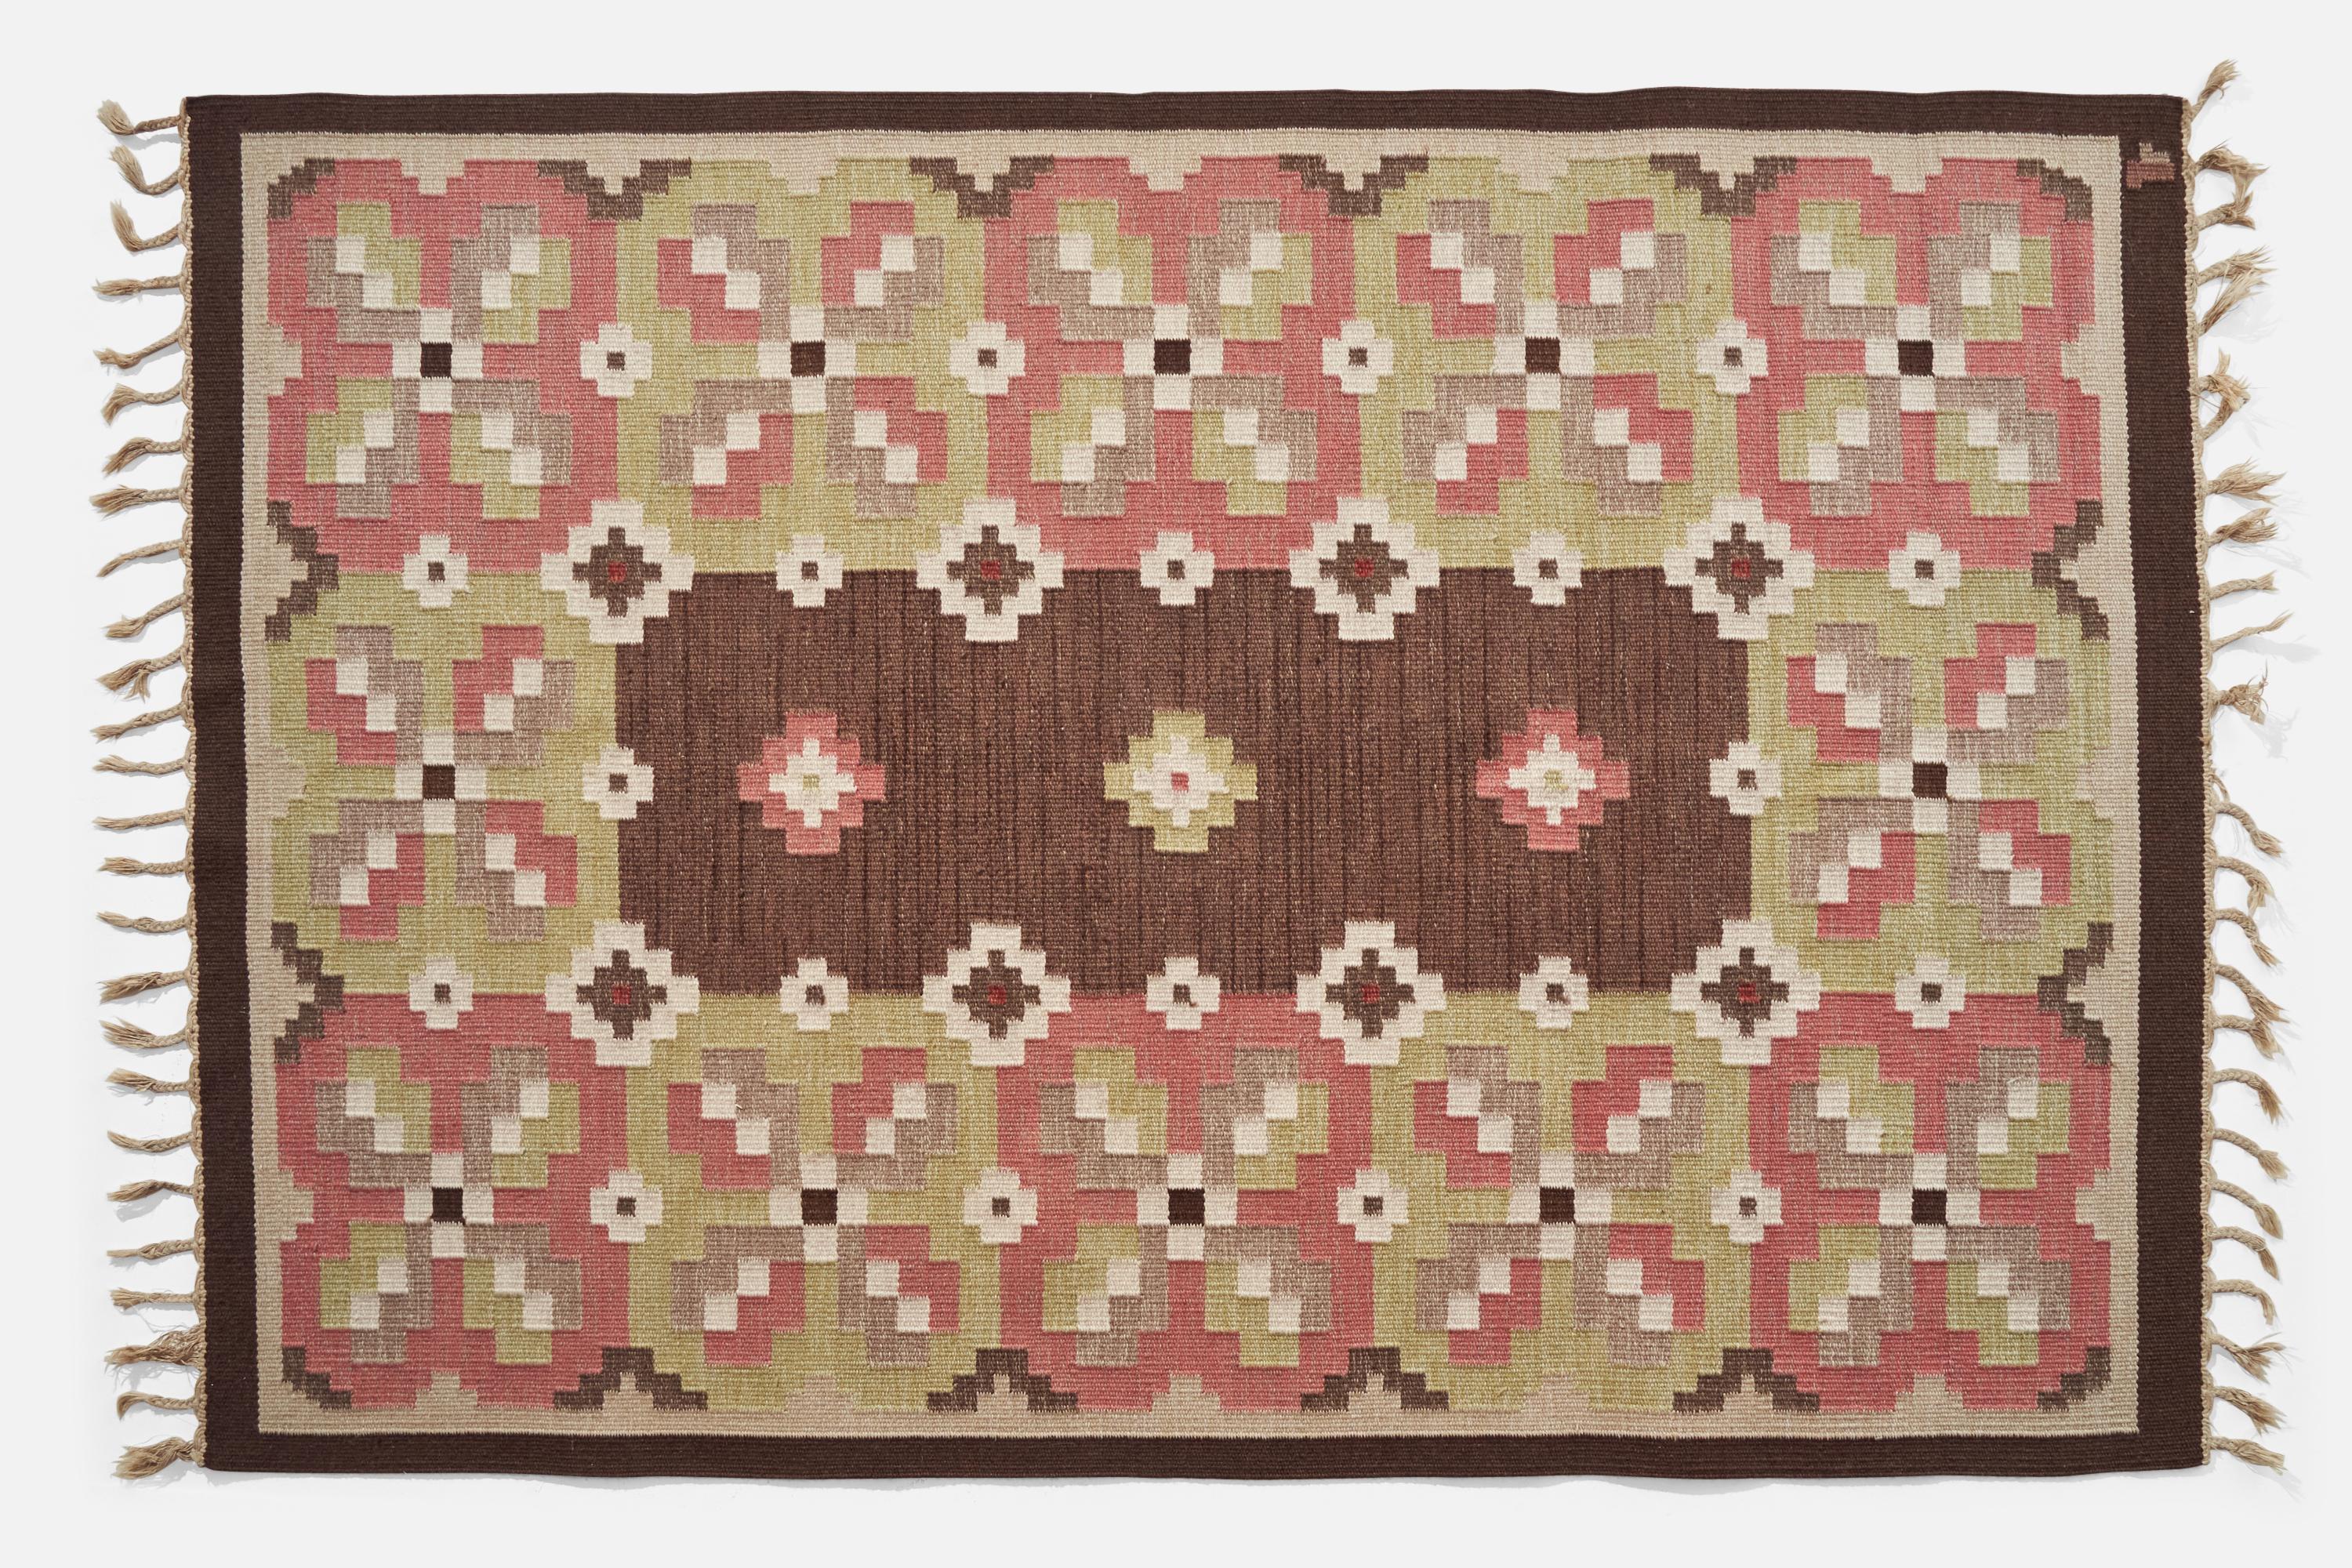 A brown, green and pink-dyed flatweave wool carpet designed by Erik Lundberg and produced by Vävaregården, Sweden, c. 1950s.